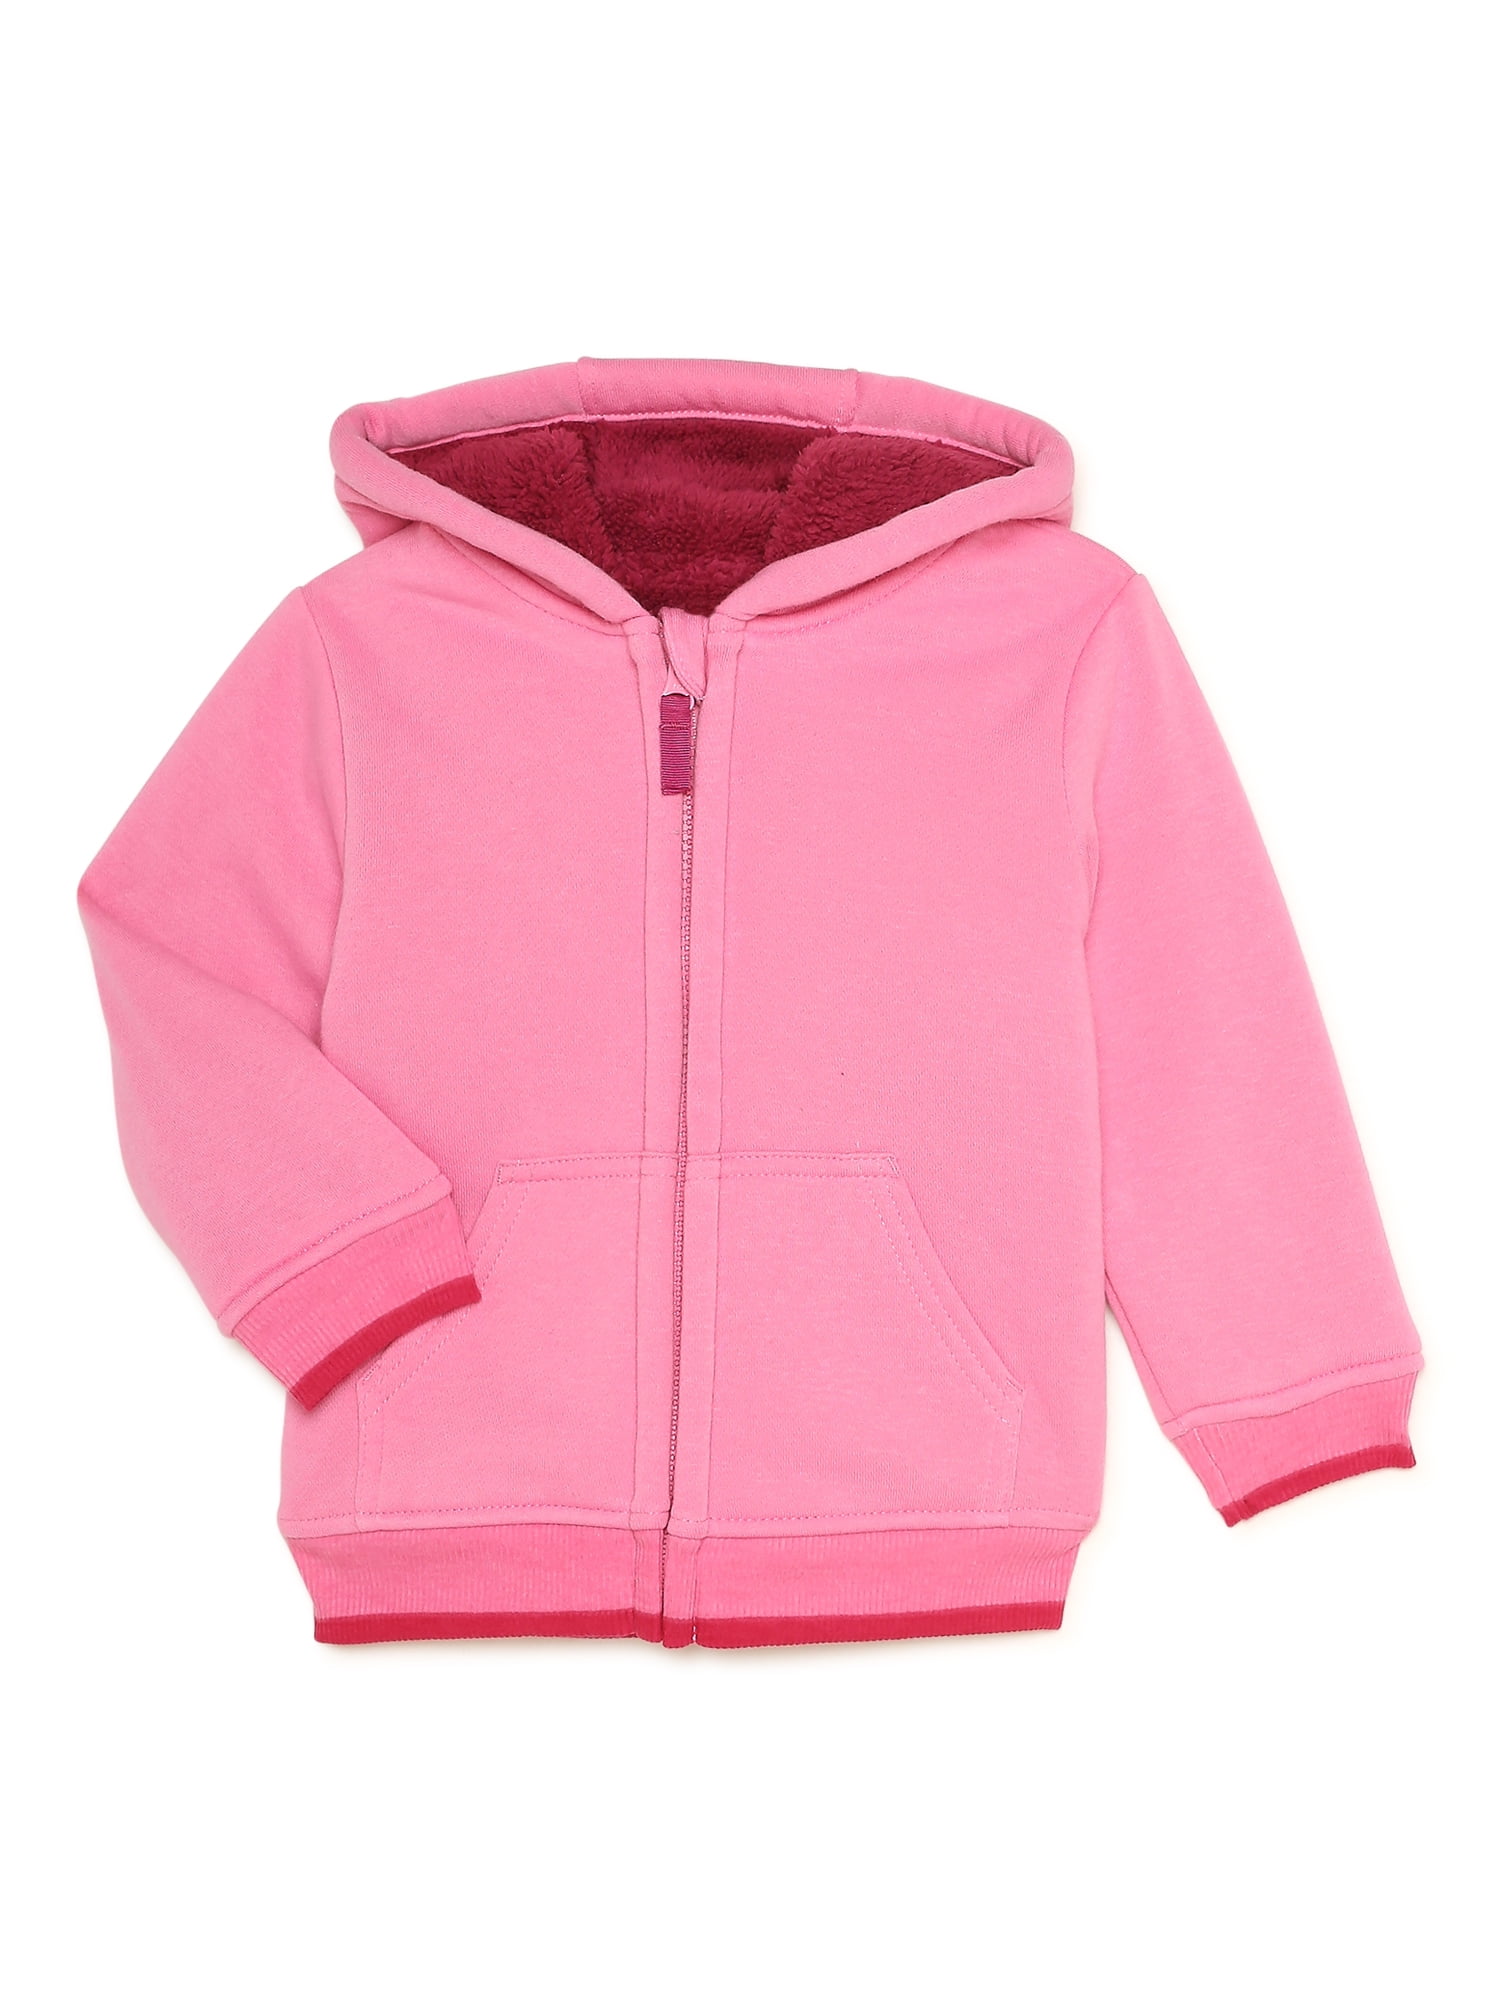 Wonder Nation Baby and Toddler Girl Sherpa Lined Hoodie, Sizes 12M-5T ...